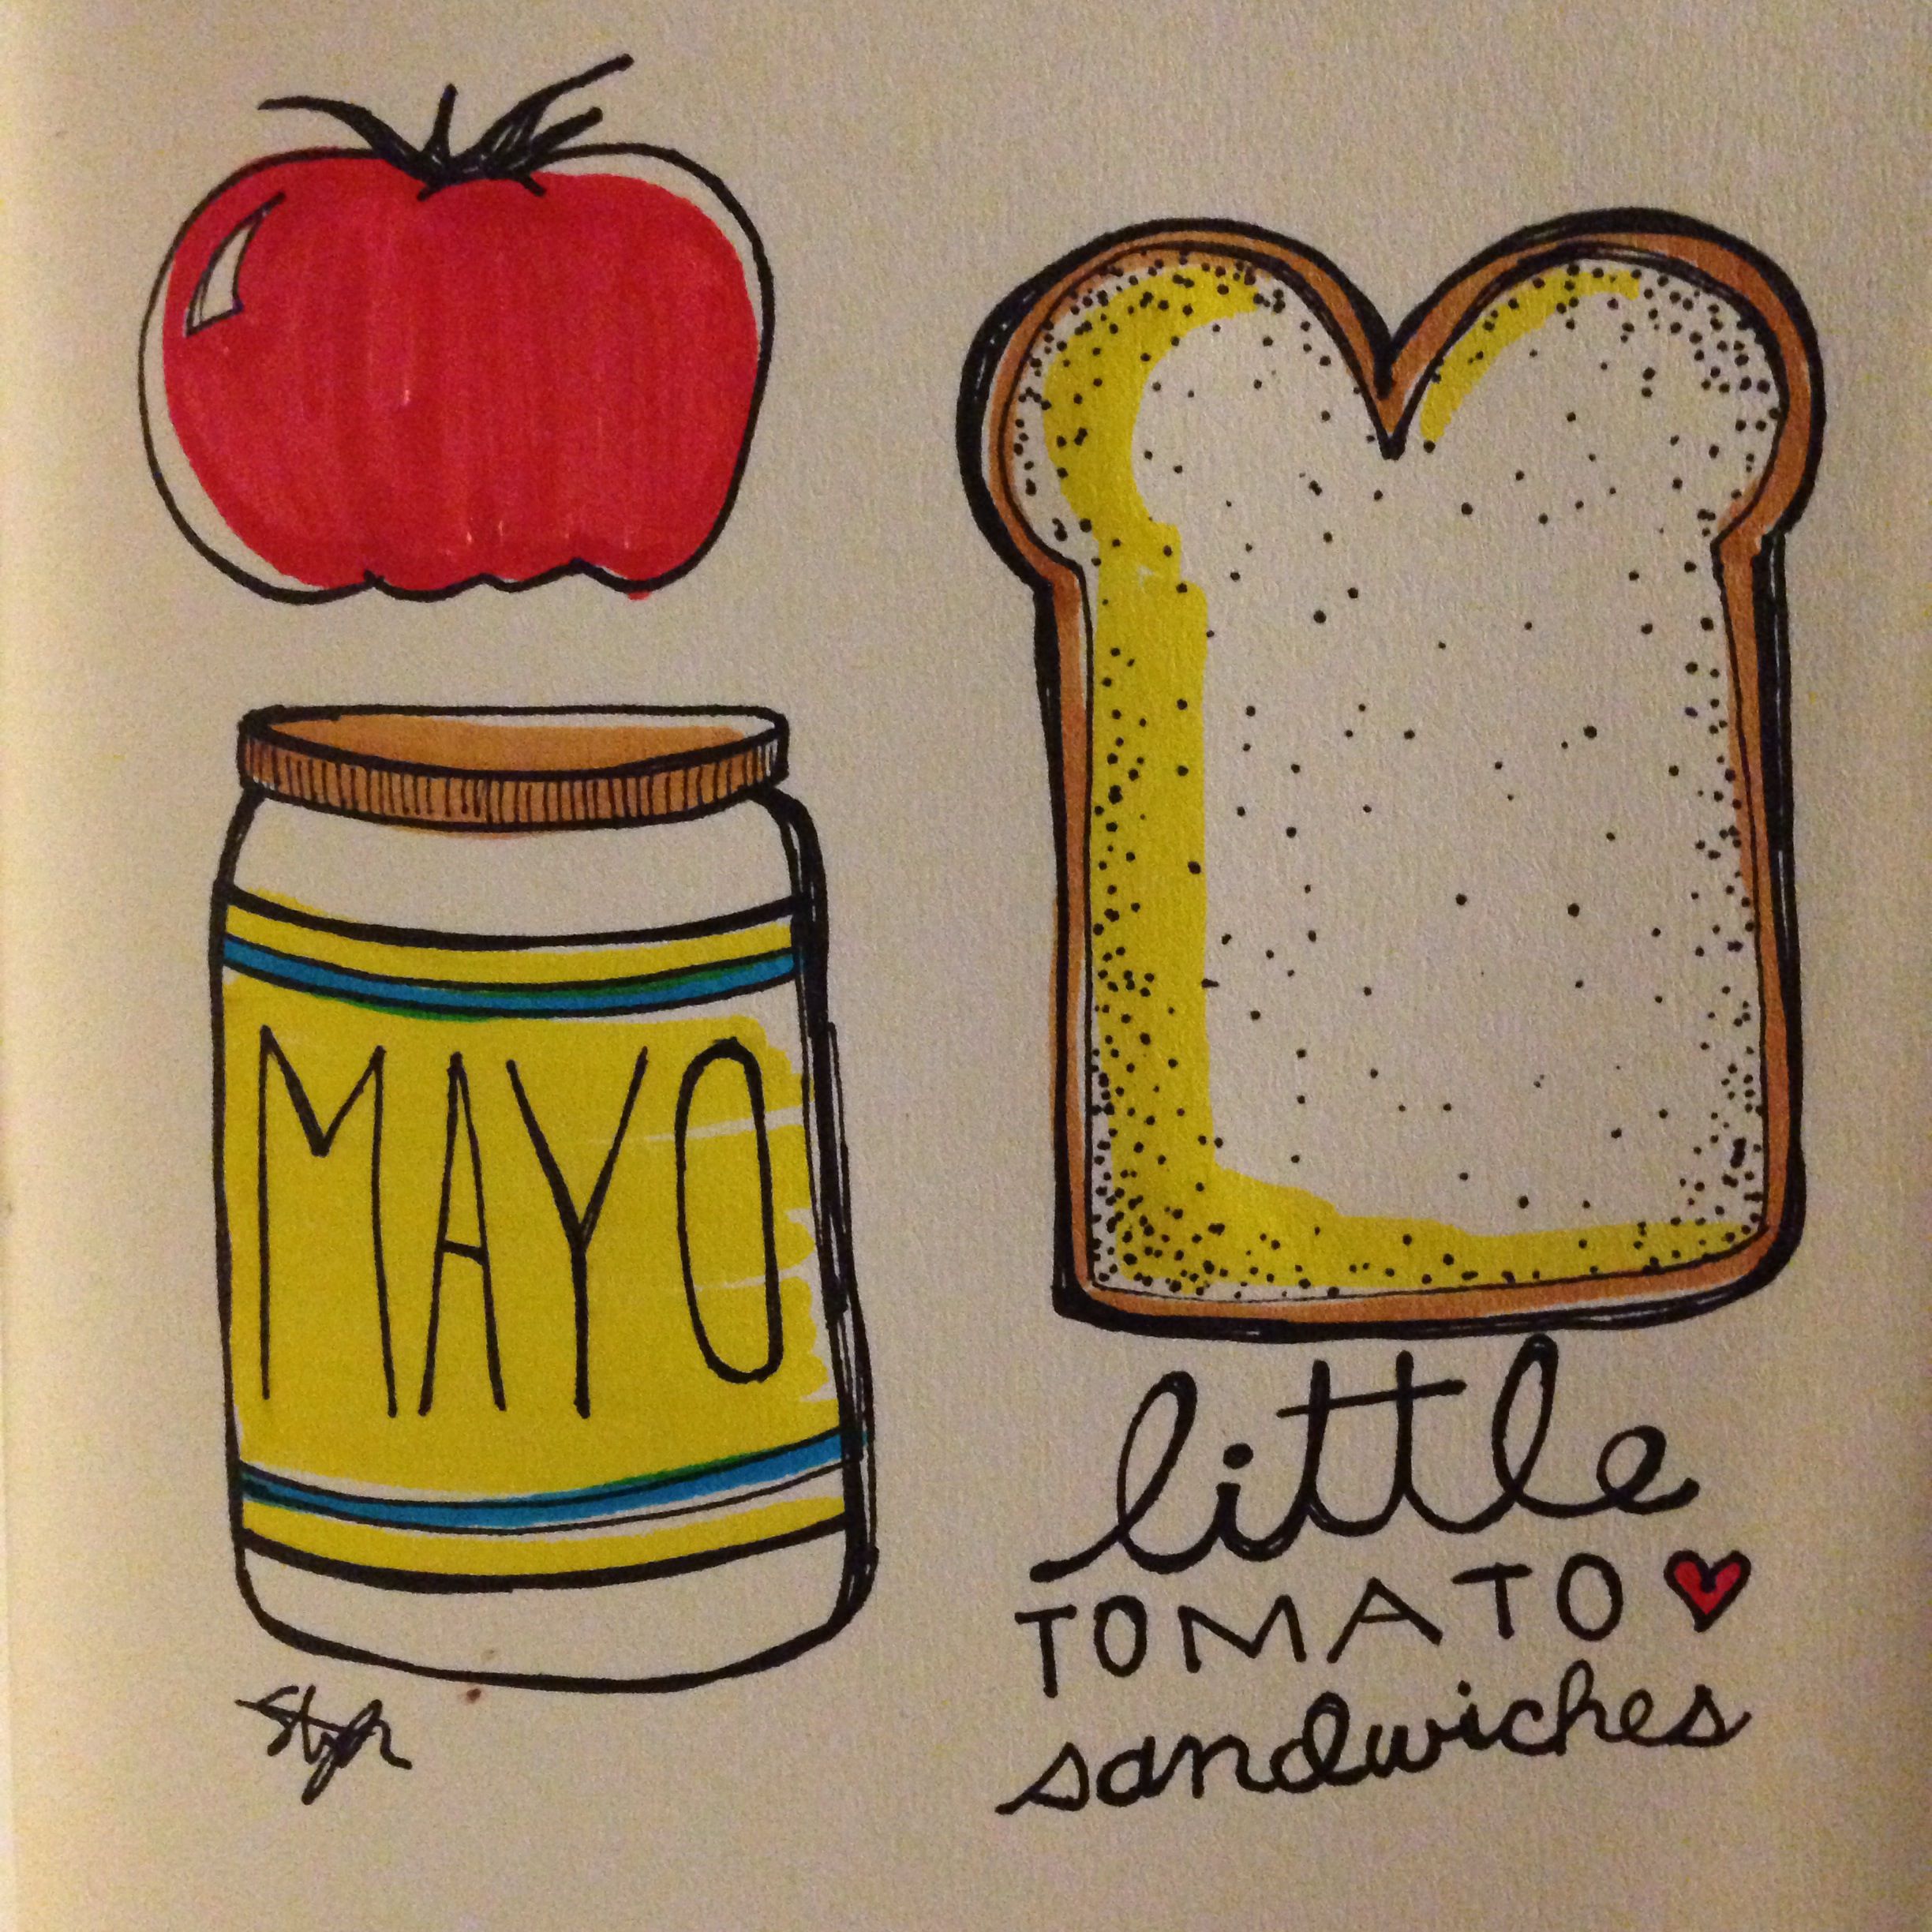 cute recipe illustration of ingredients for little tomato sandwiches - tomato, mayo, and a slice of bread